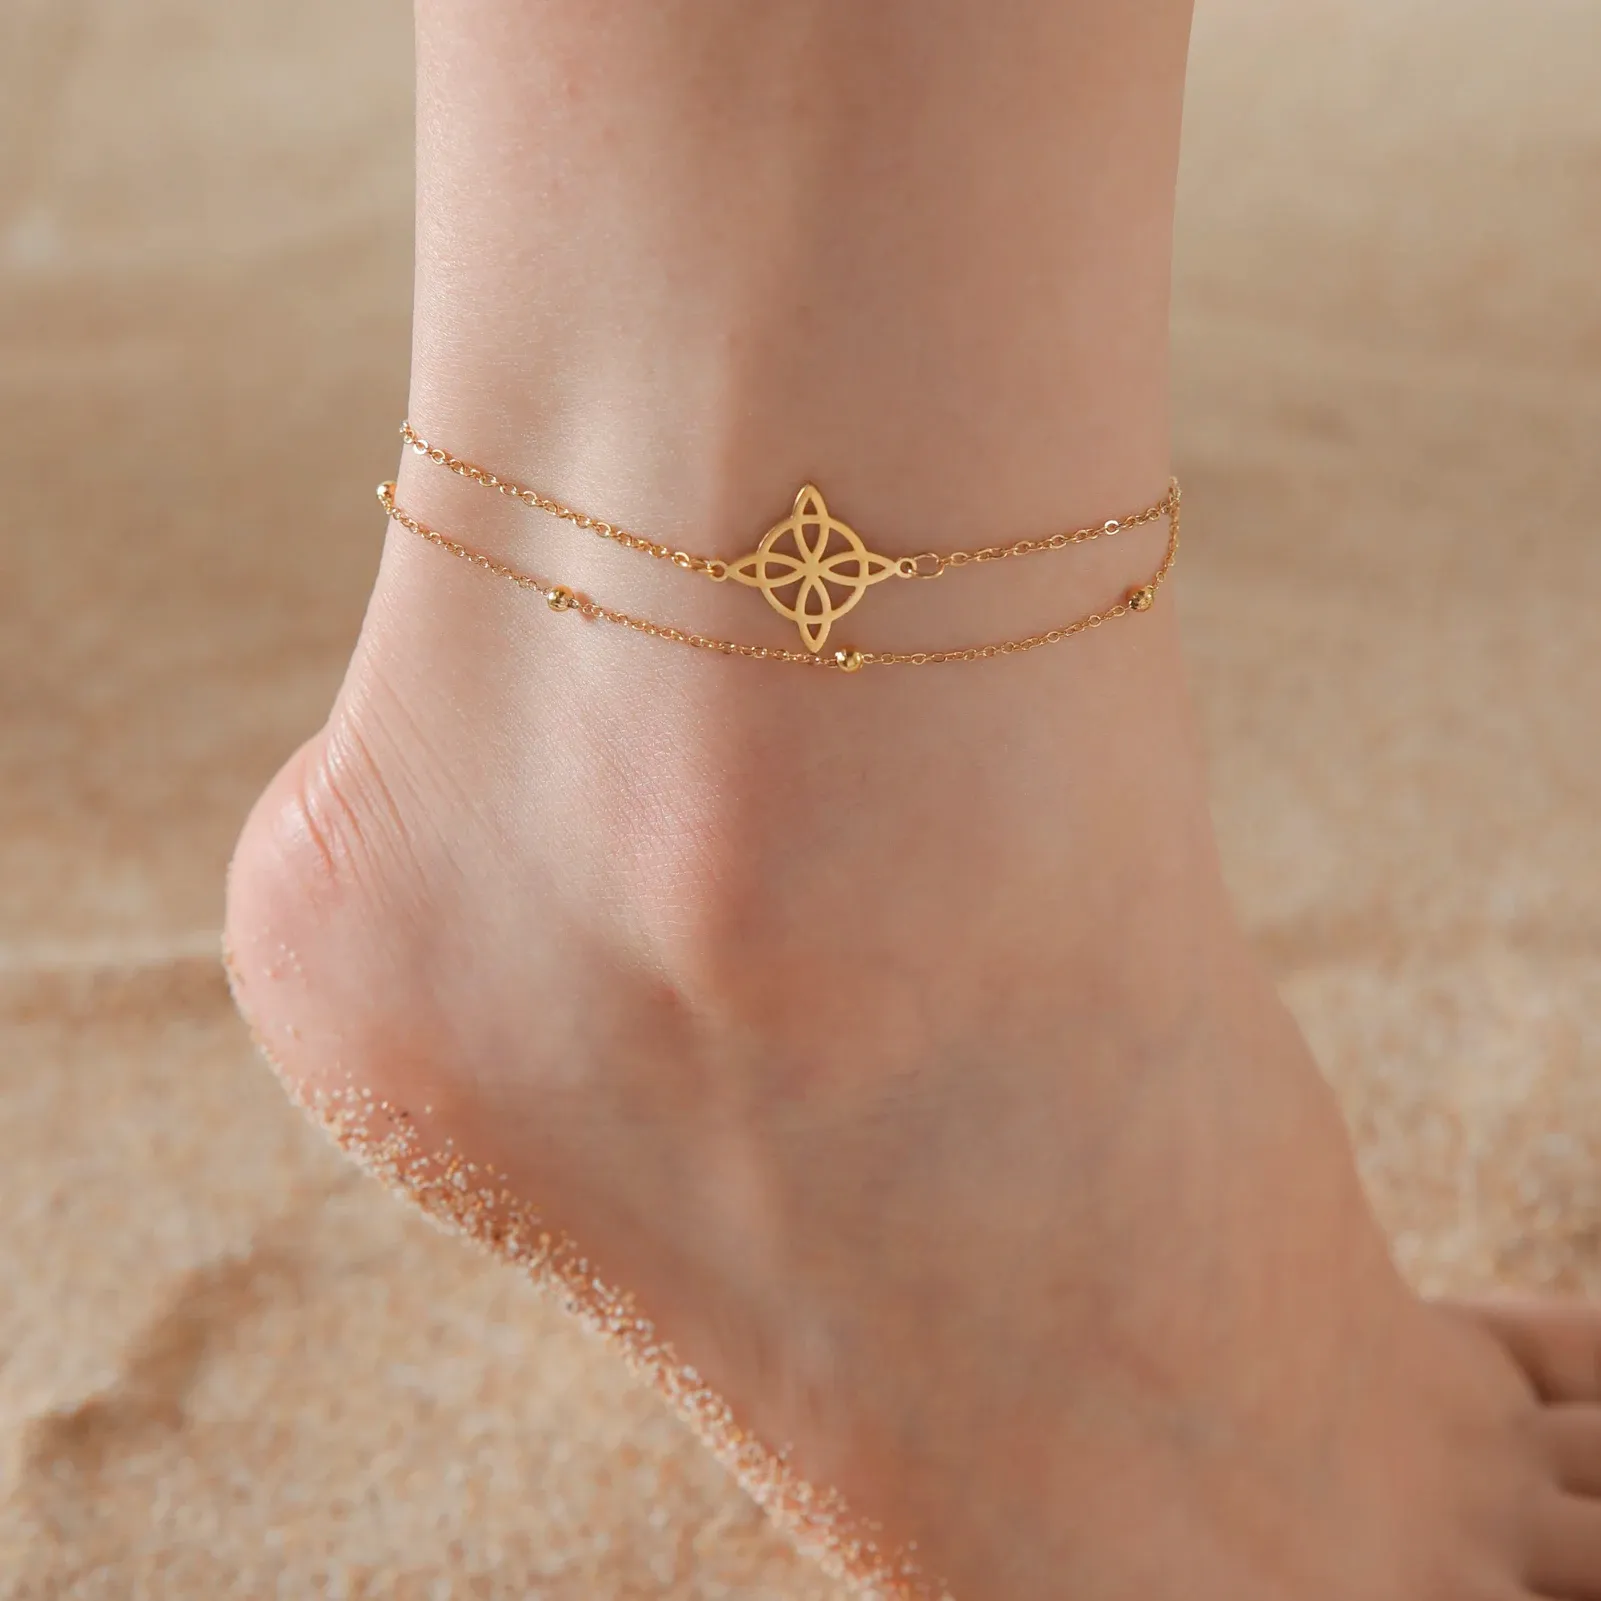 Witch Knot Anklet Women 14k Yellow Gold Double Layer Beads Chain Ankle Bracelet Witchcraft Jewelry Summer Accessories